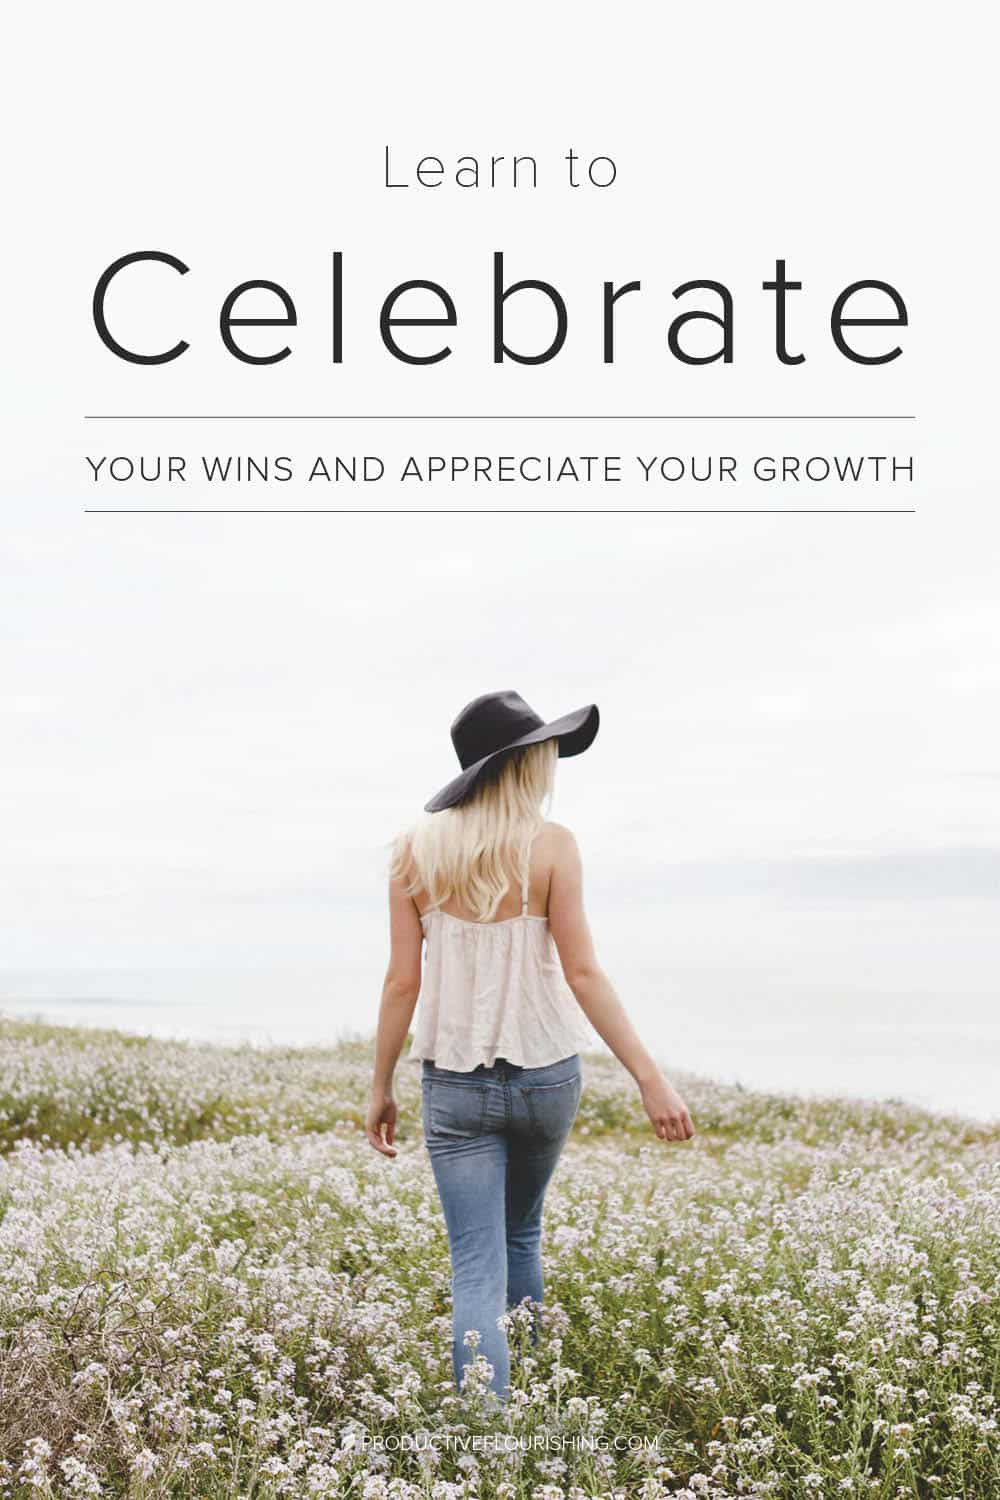 We have a tendency to forget that to be alive, capable, in community, wiser, and employed (self- or otherwise) is something to celebrate. And, by celebrate, I don’t mean think about it in passing, but, rather, to really feel it. Celebrate your wins and appreciate your growth. #motivation #personalgrowth #productiveflourishing